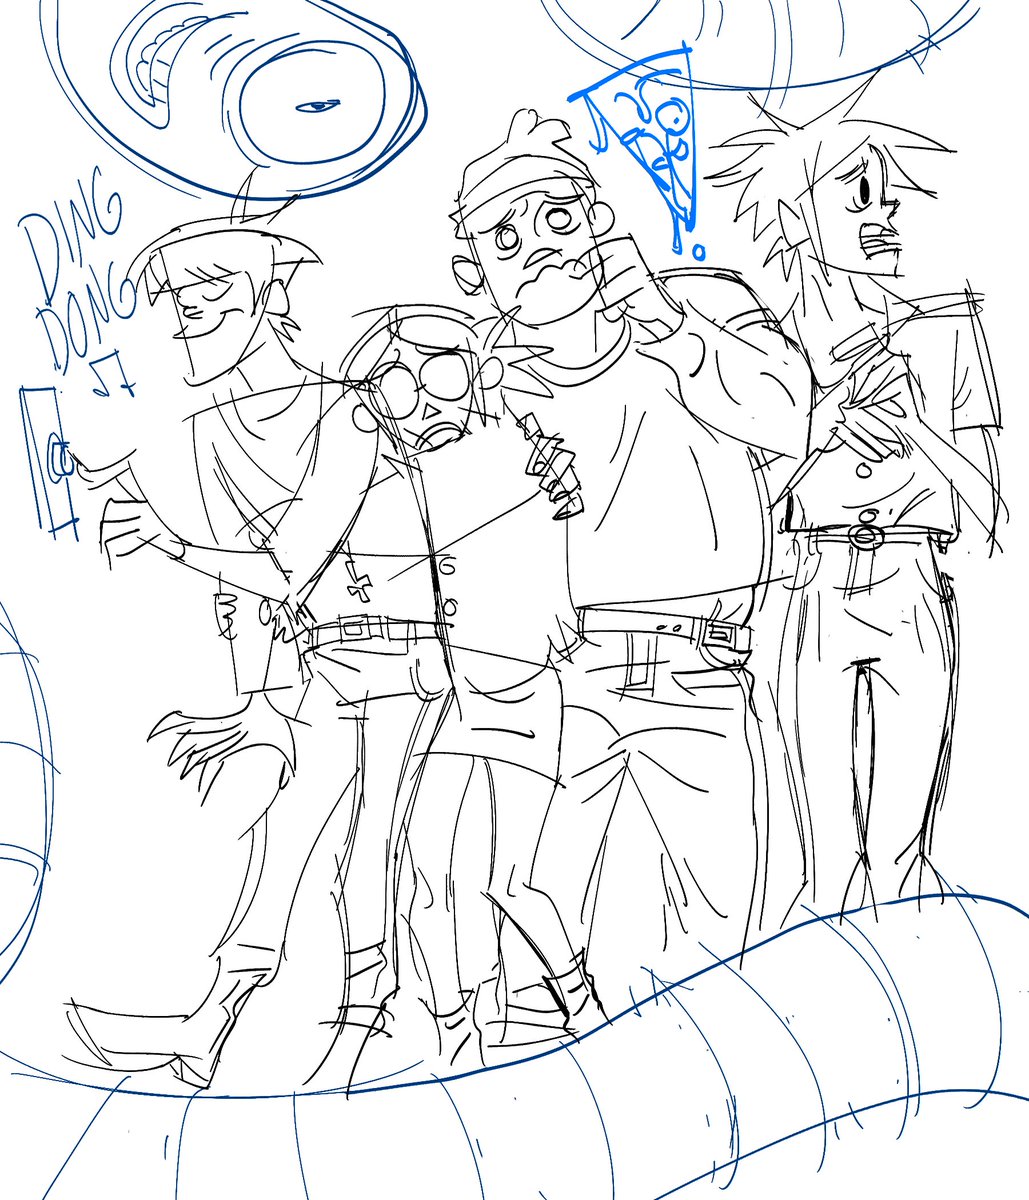 for now ill leave you with an incredibly rough wip for an upcoming gorillaz drawing. yes im obsessed with saturnz barz no i dont feel bad abt it 